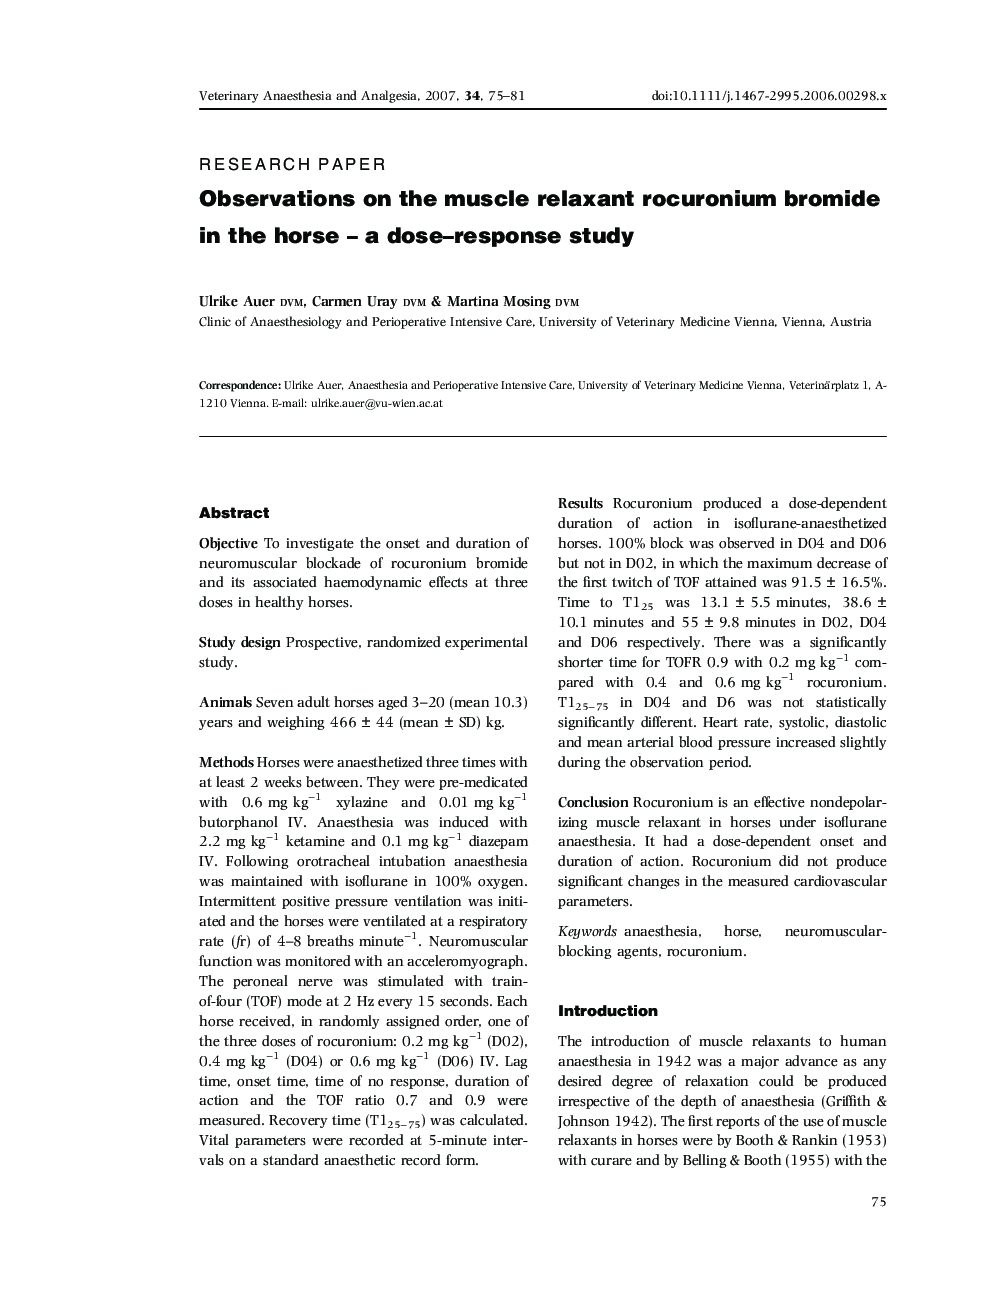 Observations on the muscle relaxant rocuronium bromide in the horse - a dose-response study